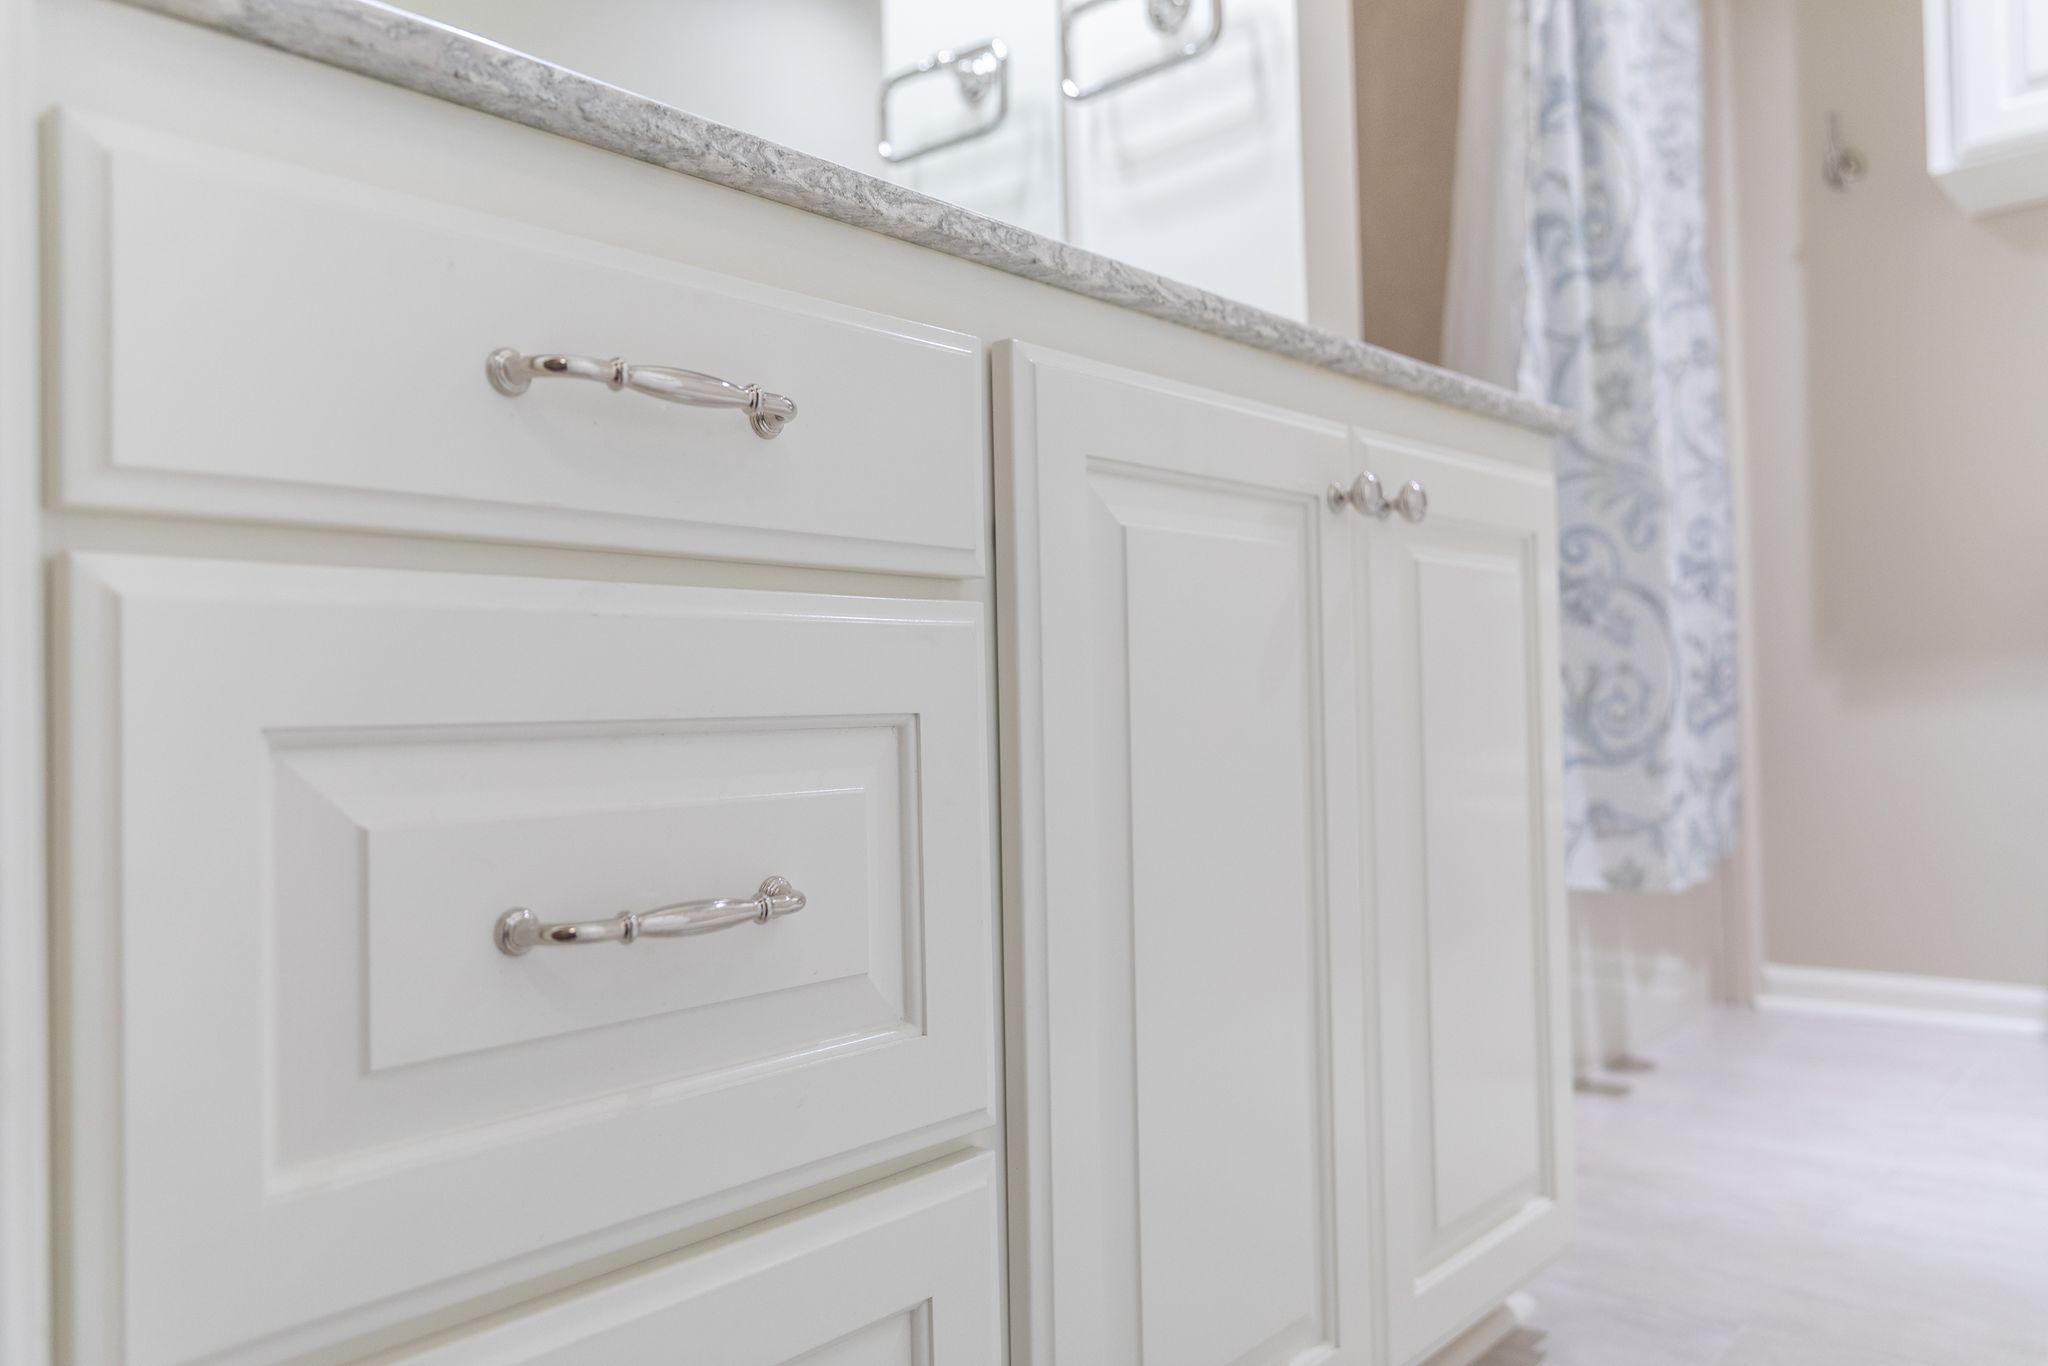 pulls and knobs on white cabinets